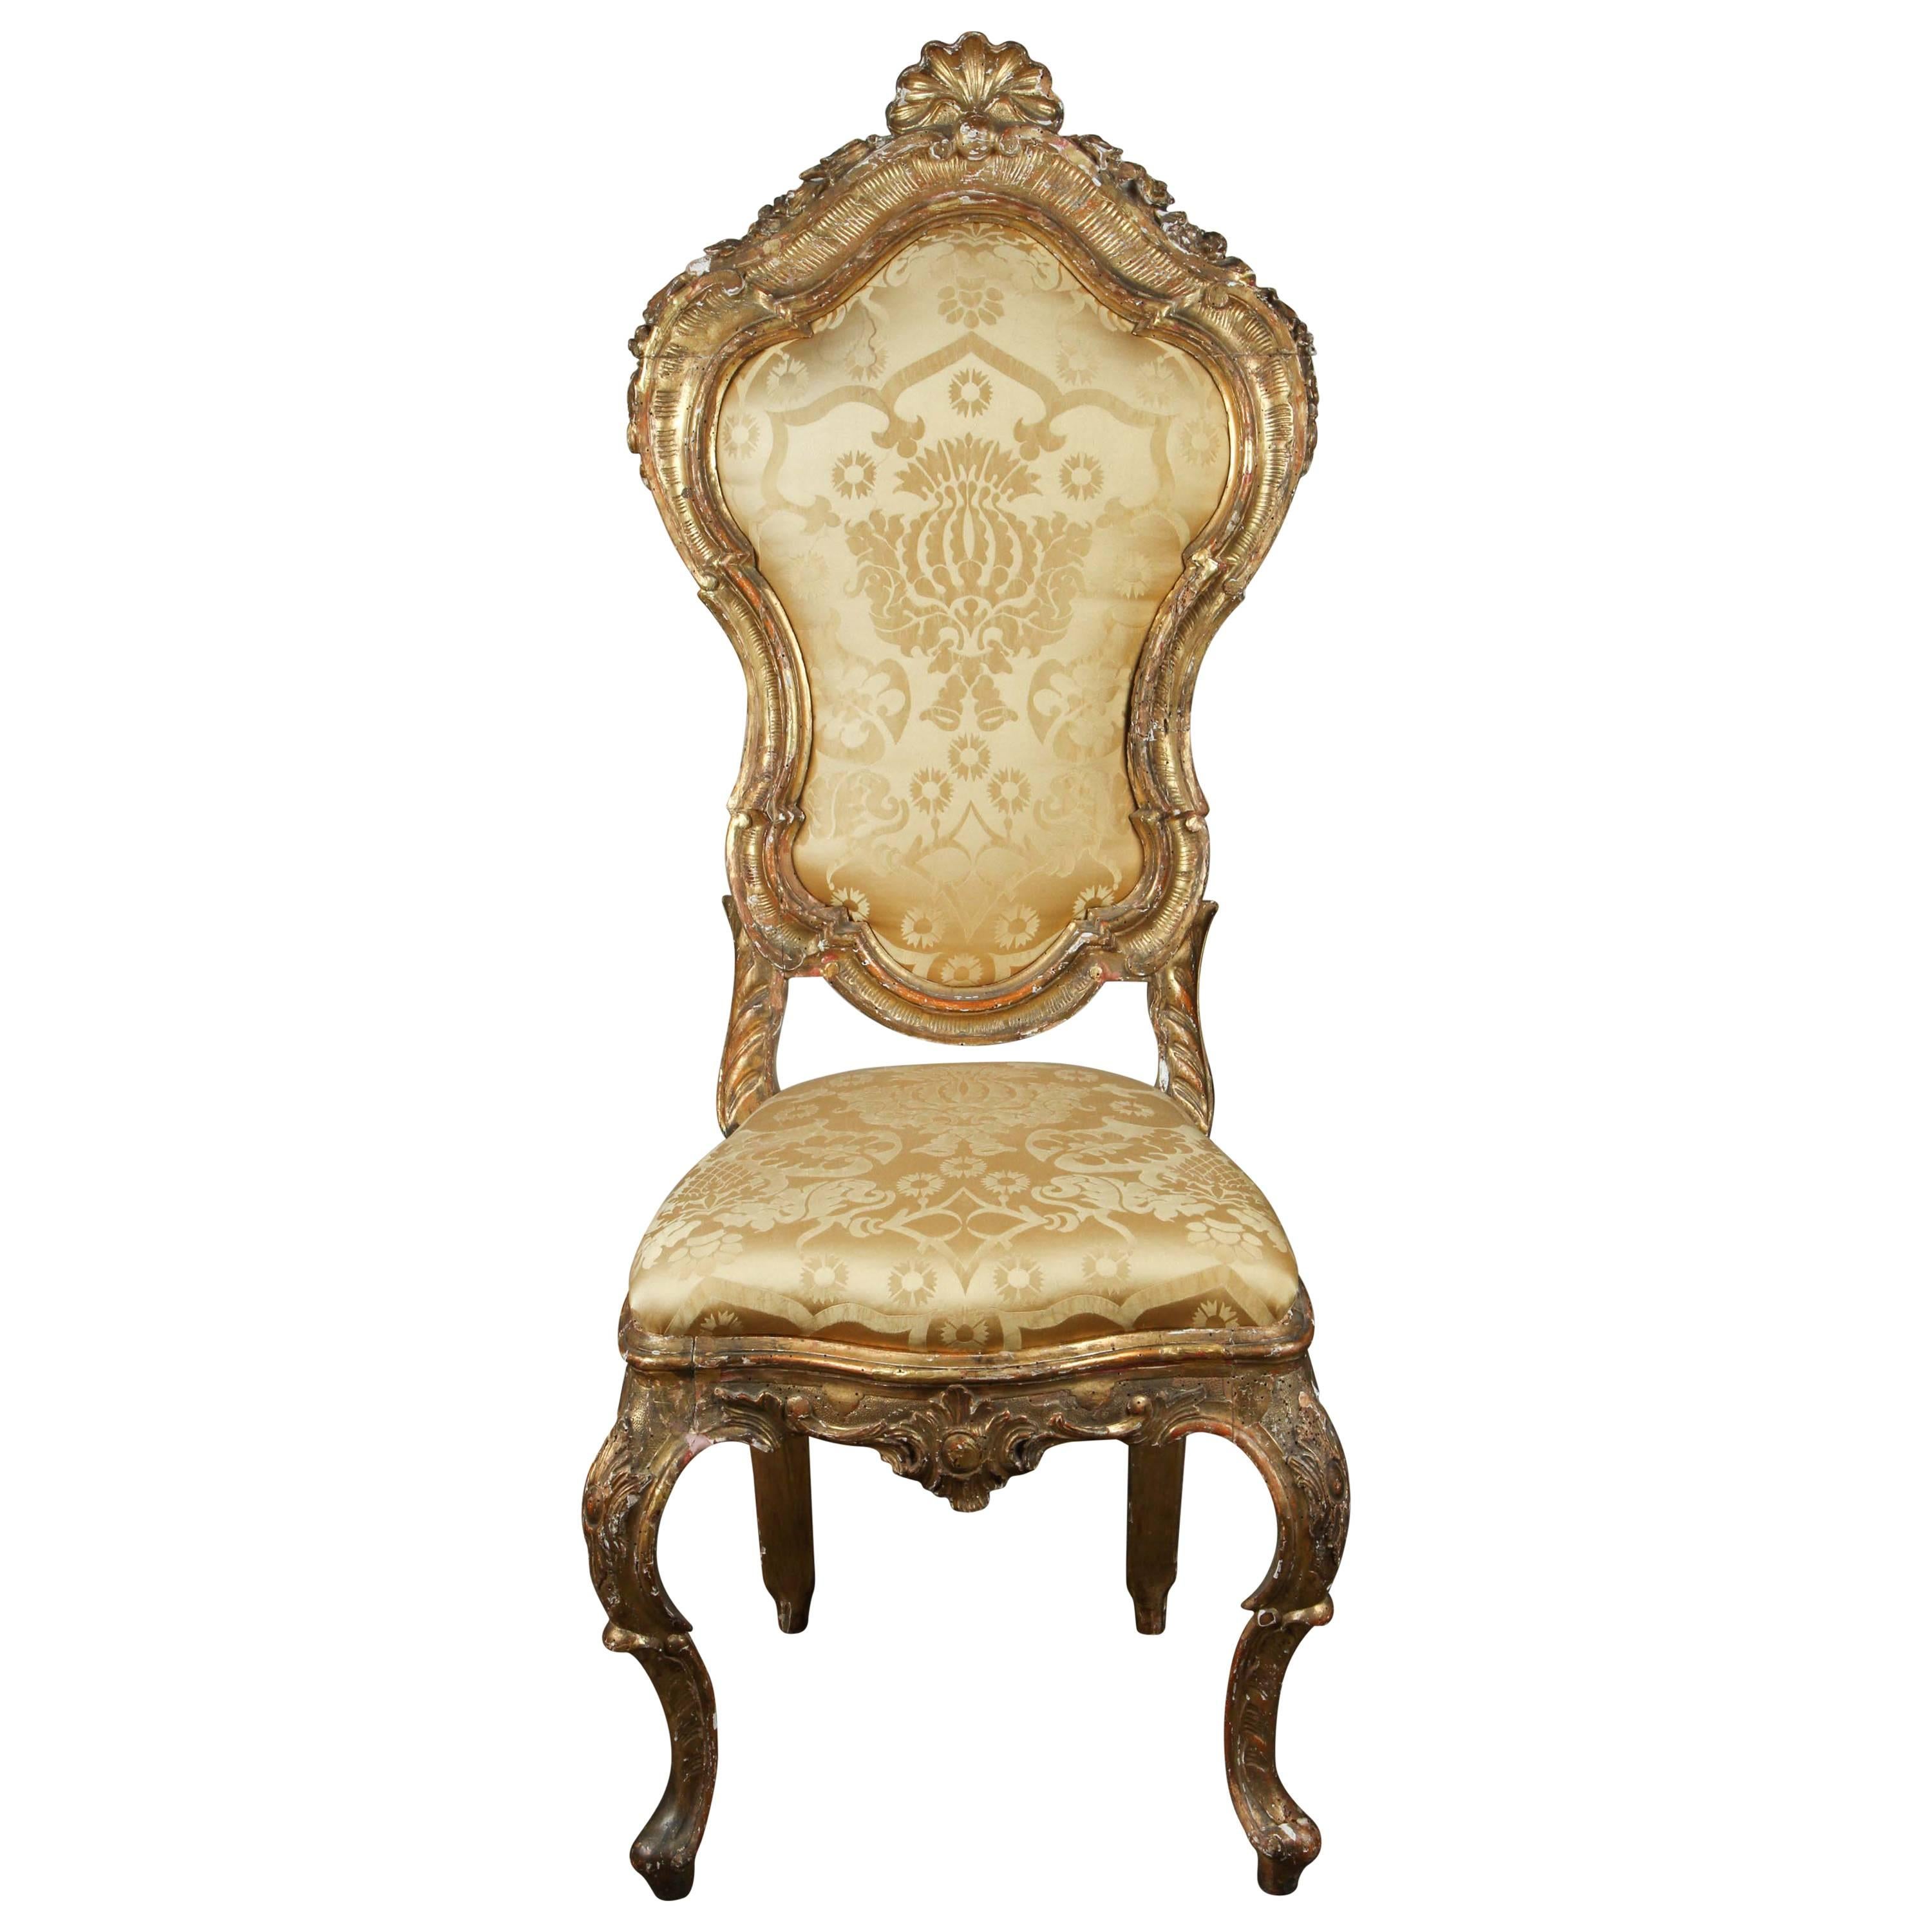 What is a French berère chair?